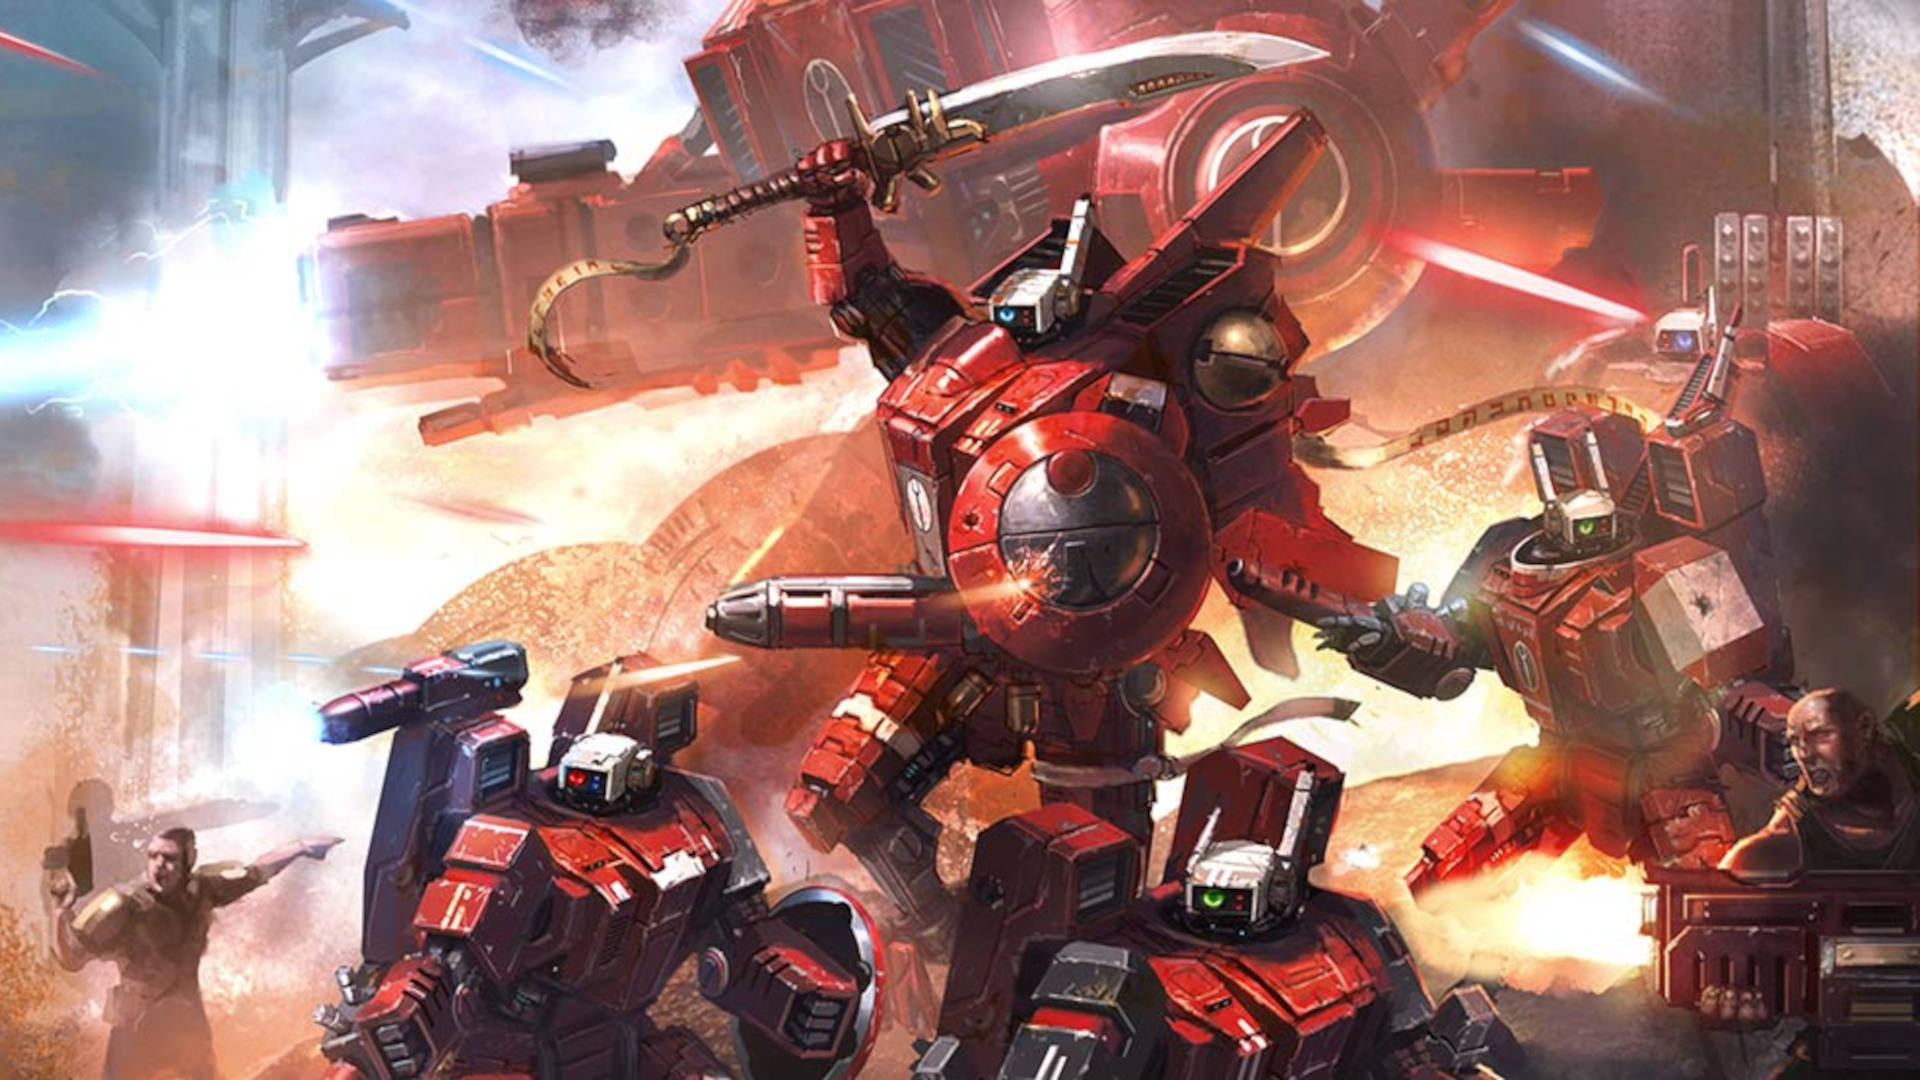 Warhammer 40k T’au codex will release early 2022